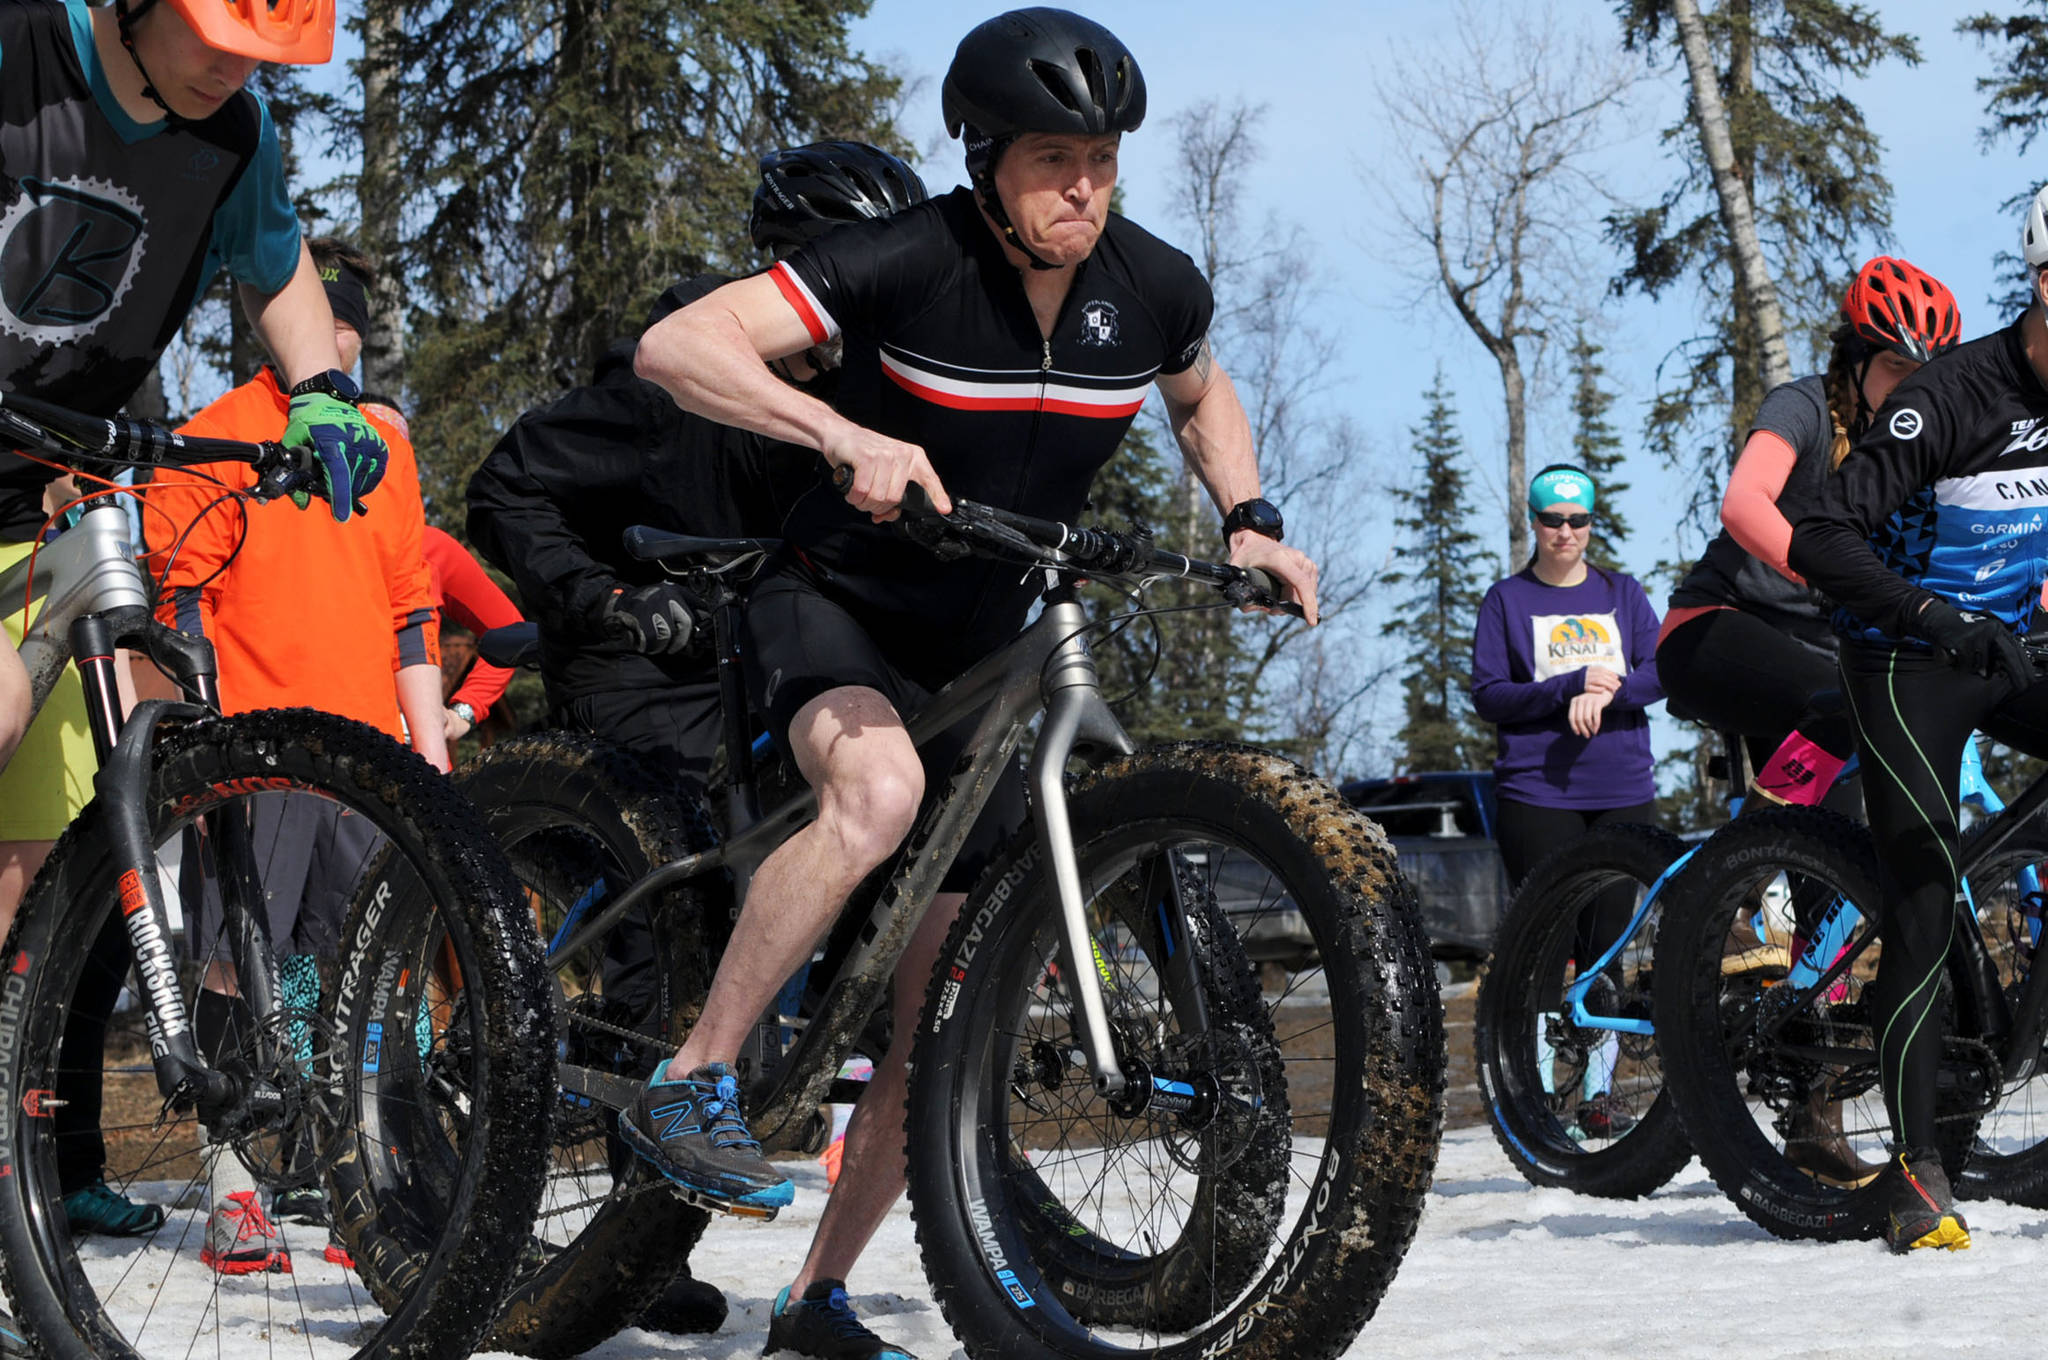 Mike Crawford of Kenai launches his fatbike on the Wolverine Trail at the start of the 2018 Choose Your Weapon race at Tsalteshi Trails on Sunday, April 15, 2018 in Soldotna, Alaska. Racers completed two 5-kilometer laps around the lower trails by running, biking or skiing, with the option of switching between laps for extra points. Most of the trails had some snow with patches of wet mud sprinkled throughout as spring temperatures begin to dominate the central Kenai Peninsula. (Photo by Elizabeth Earl/Peninsula Clarion)